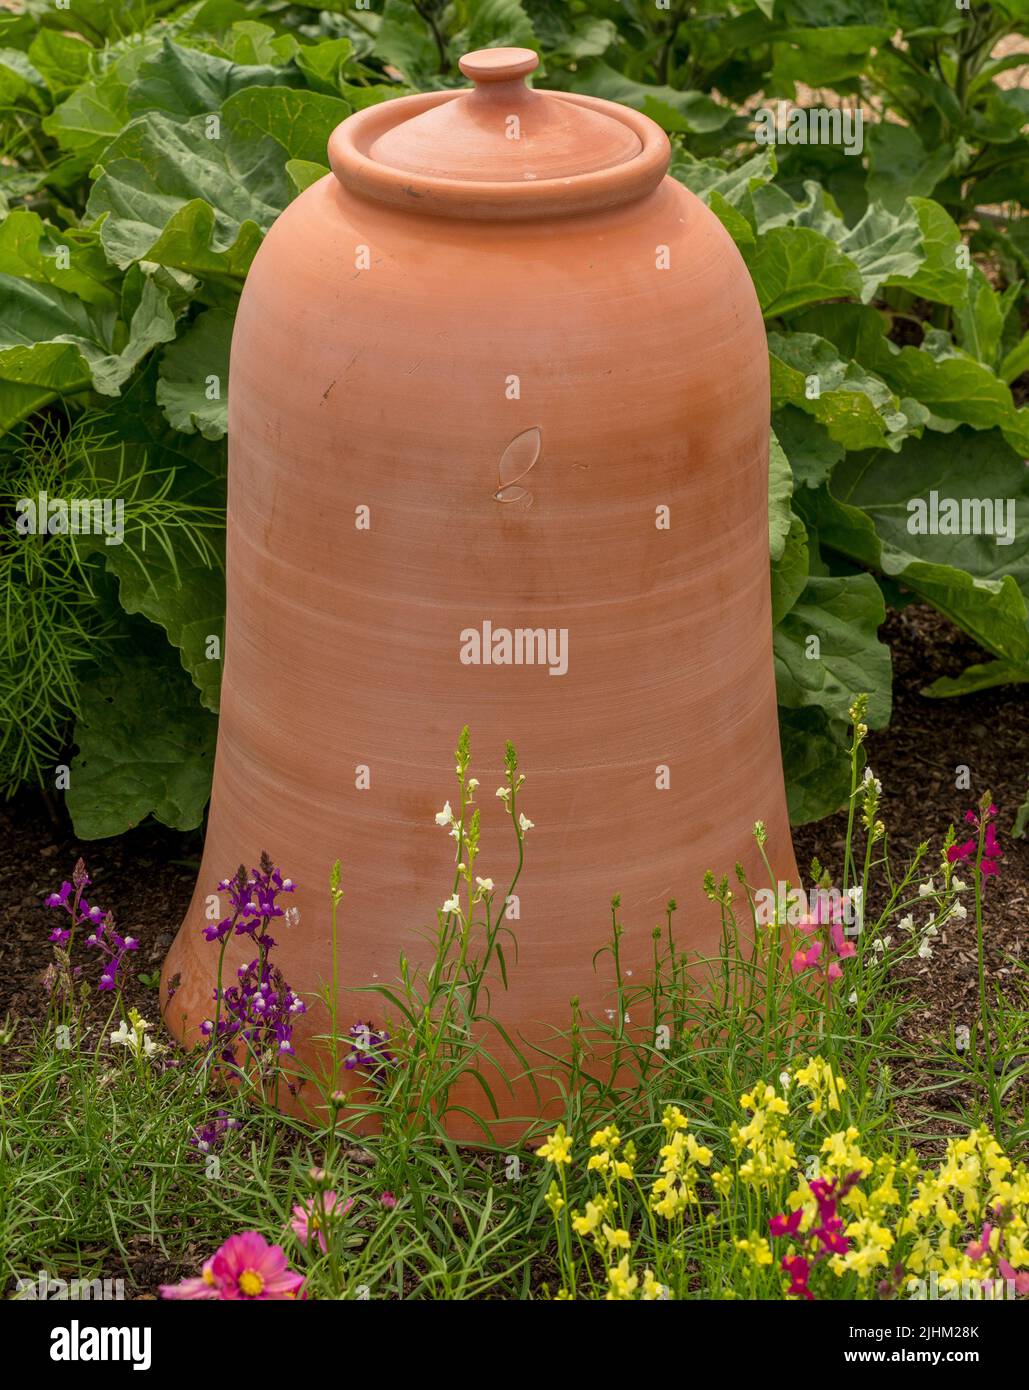 Terracotta Rhubarb forcer in a UK garden with colourful flowers in the foreground. Stock Photo